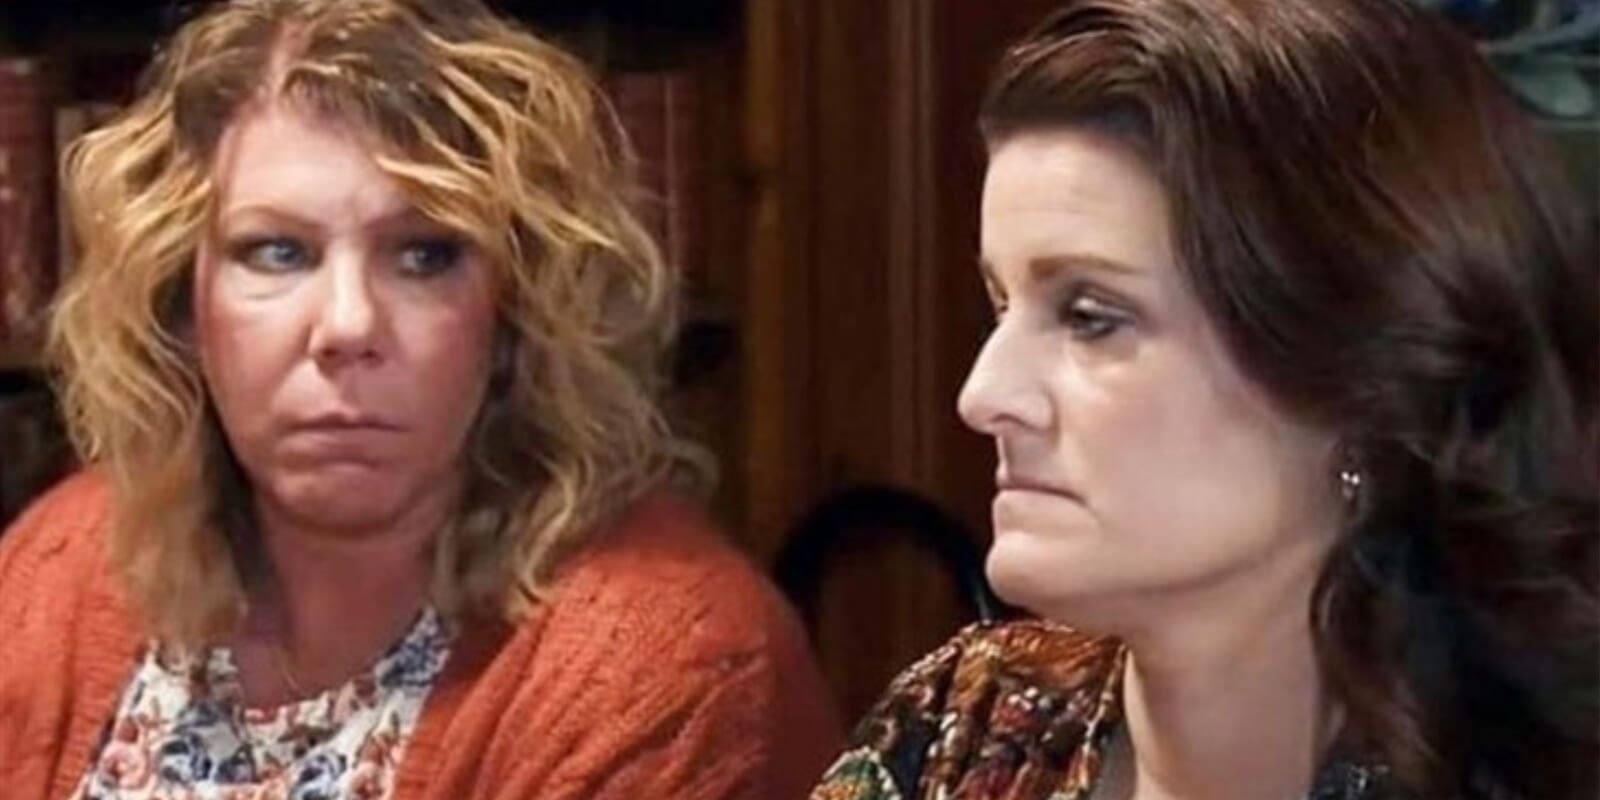 Meri and Robyn Brown in a screengrab from TLC's 'Sister Wives.'